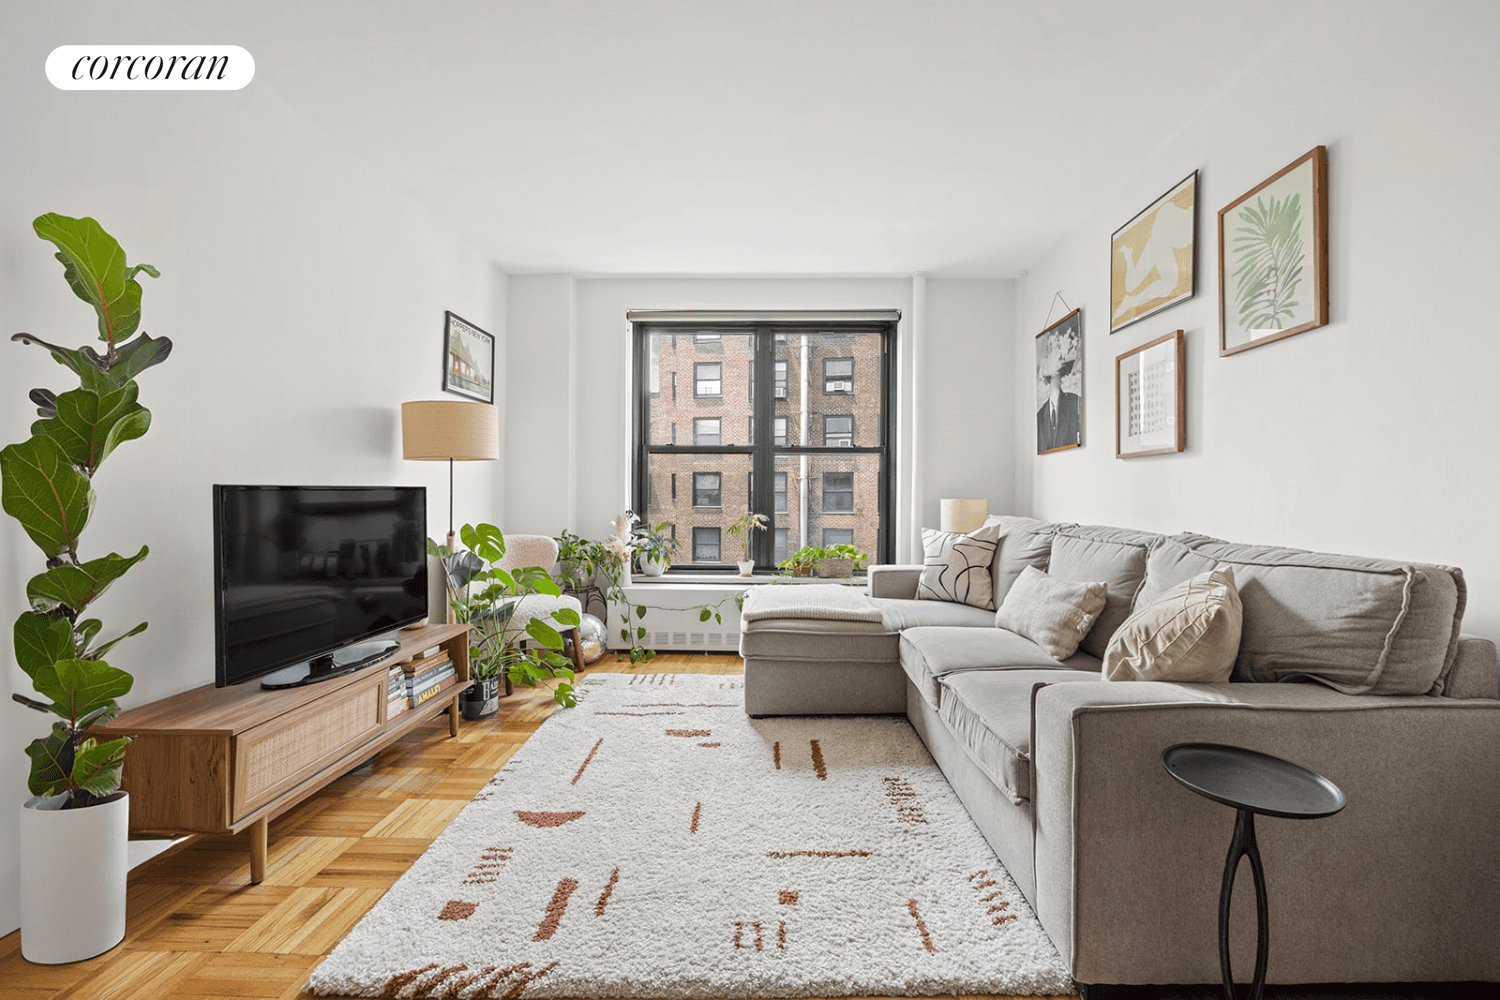 This is a spacious and updated Junior 1 bedroom Coop home located in historic Clinton Hill on the border of Fort Greene just 20 minutes to Manhattan.